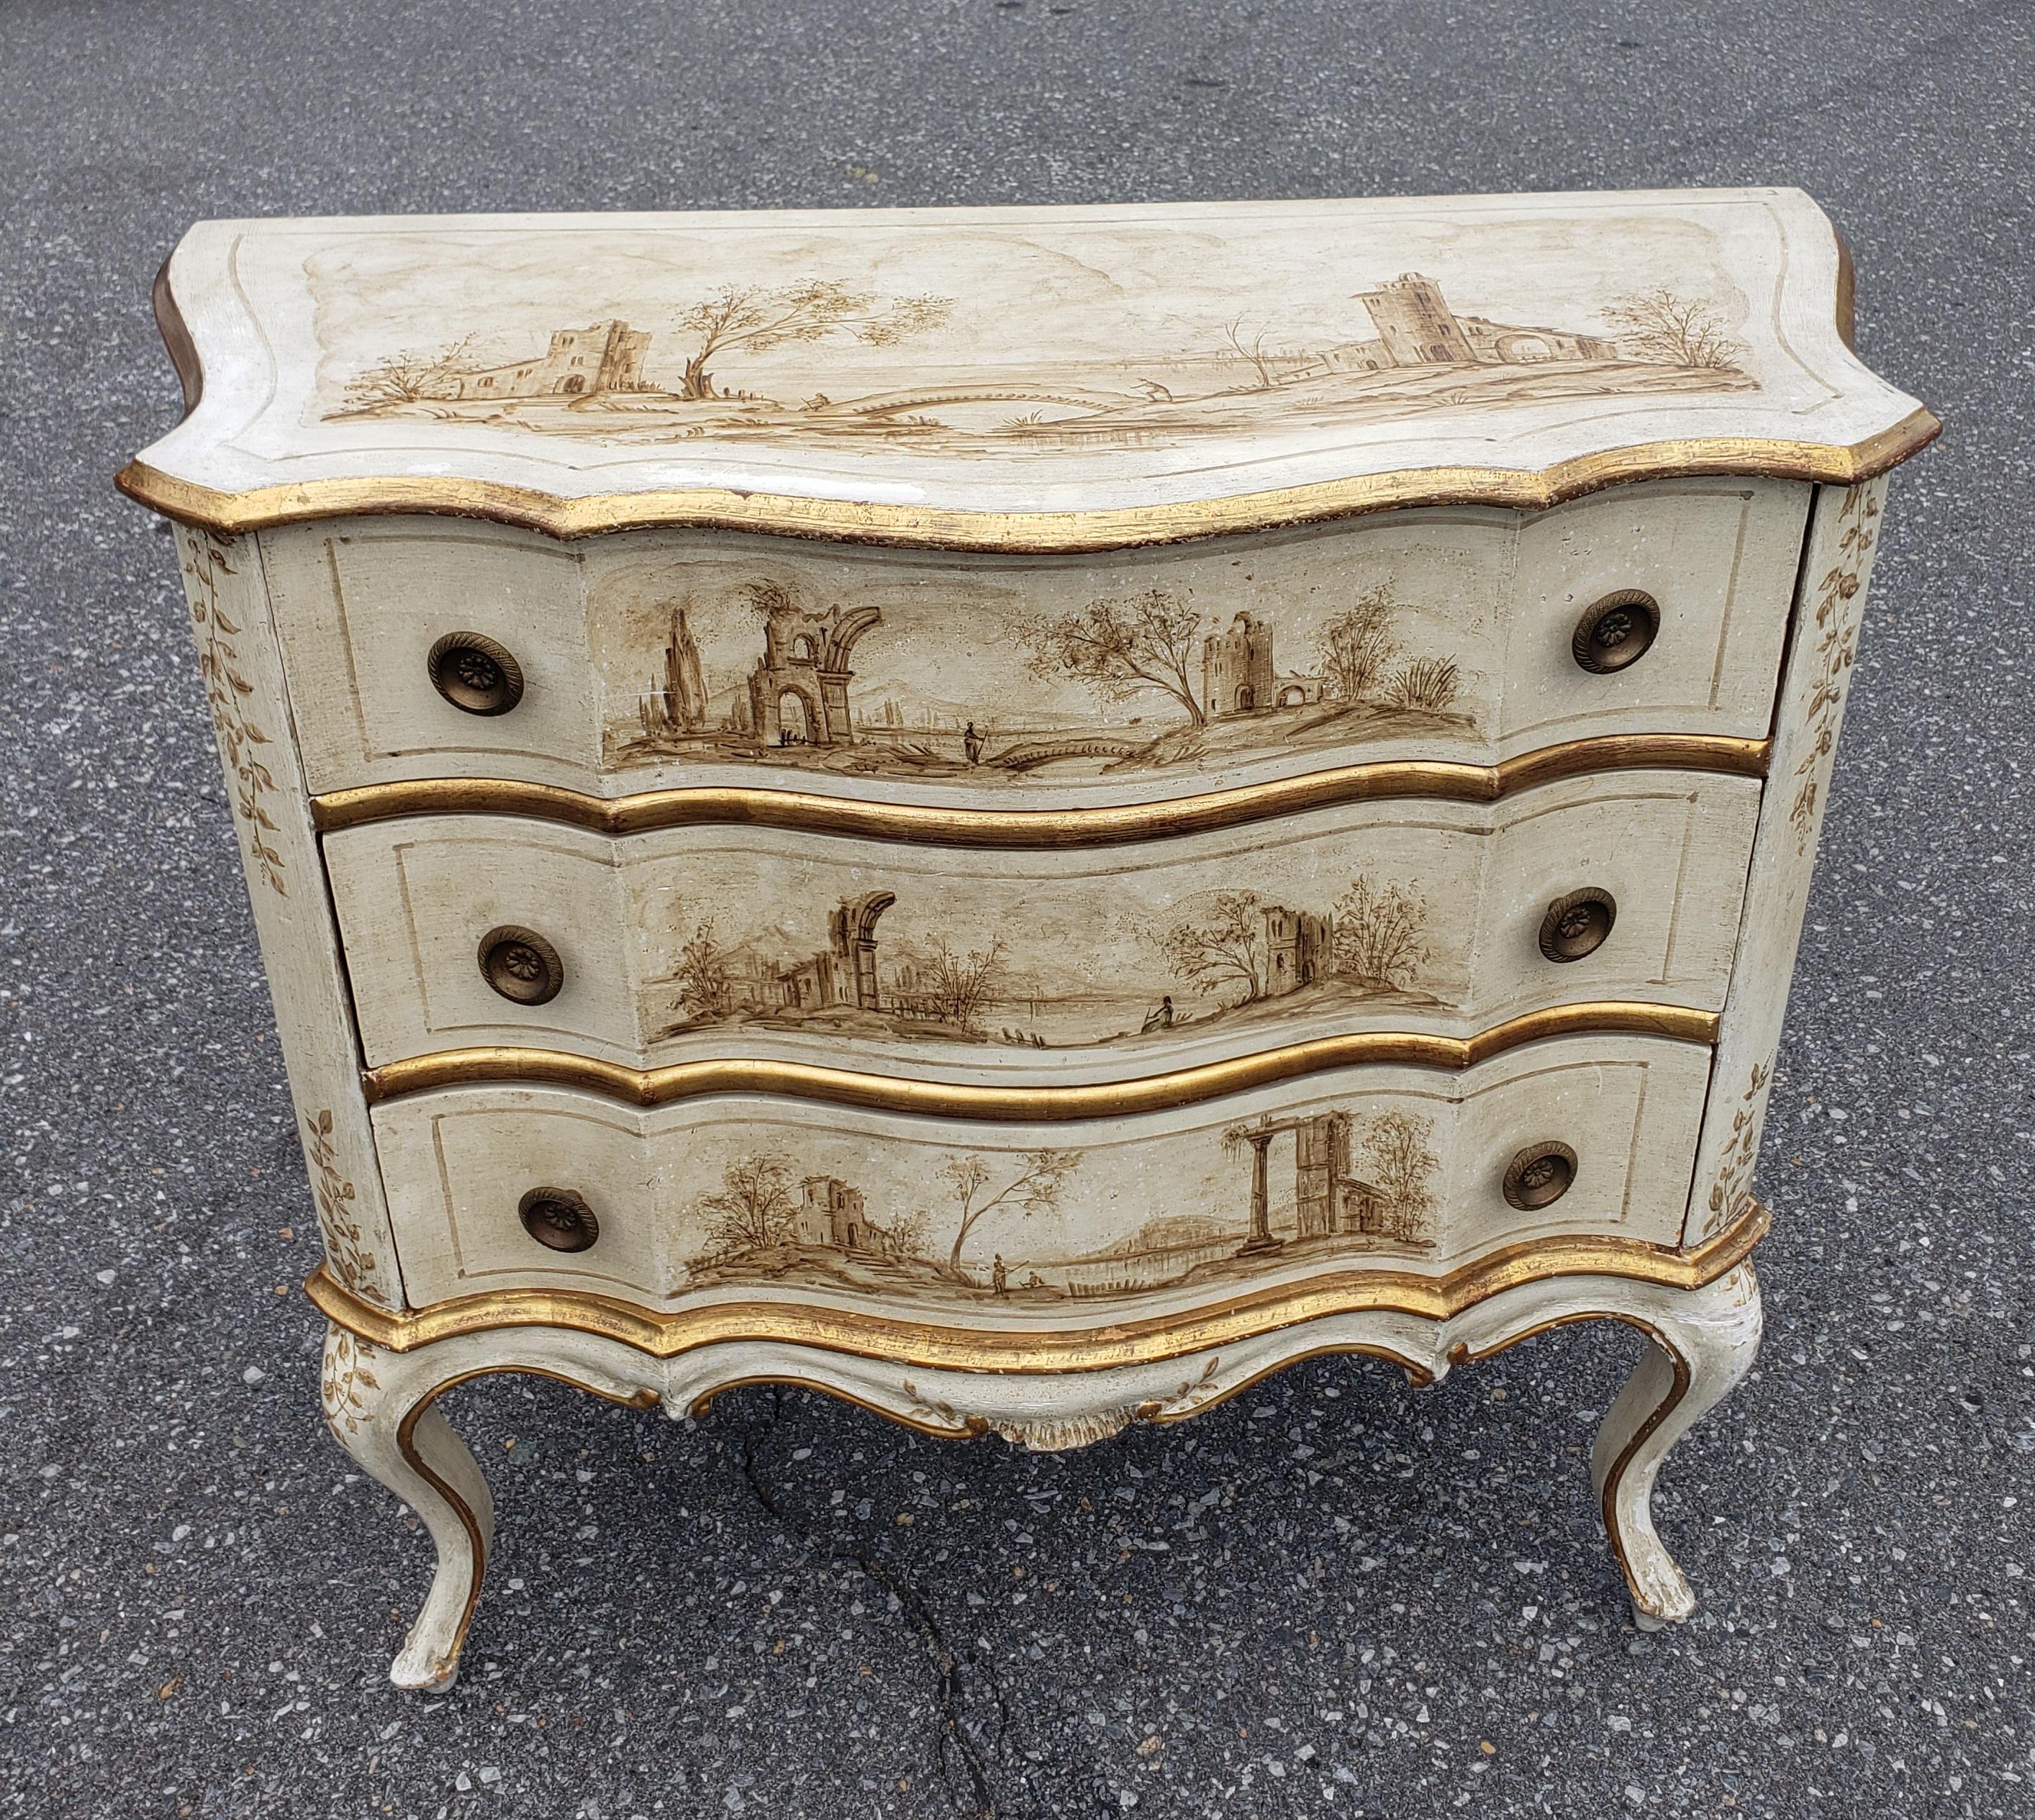 Absolutely gorgeous Louis XV style Venetian Four Sided Hand-Painted and Decorated Partial Gilt Commode with protective Glass Top.  Each of the four side painting depicts a different scene. Brown colir paintings on off-withe background and Giltwood